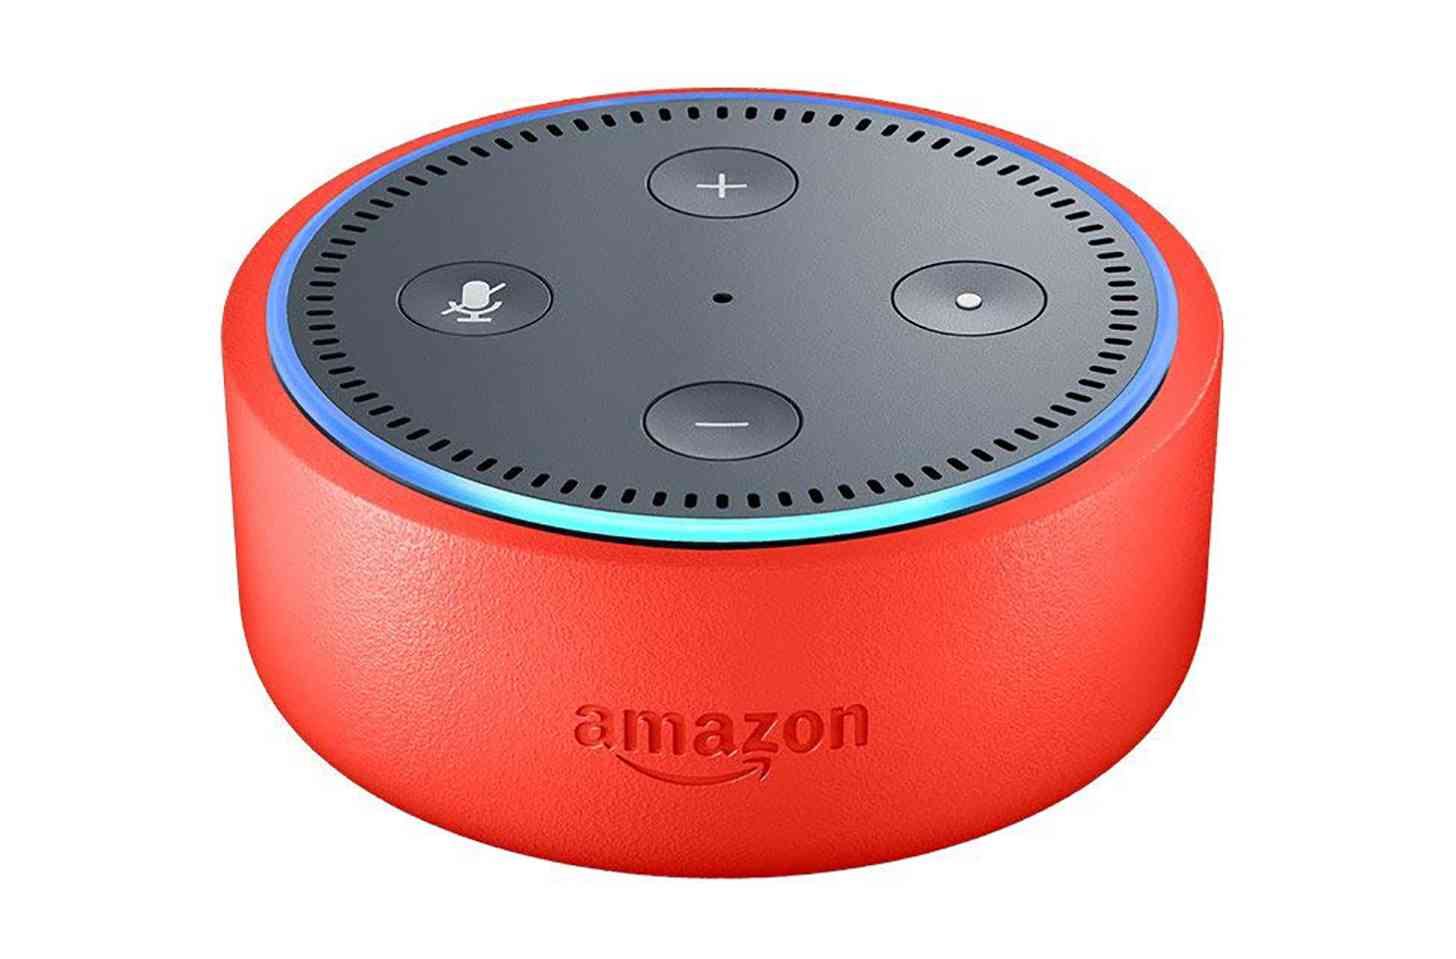 Amazon Echo Dot Kids Edition punch red case